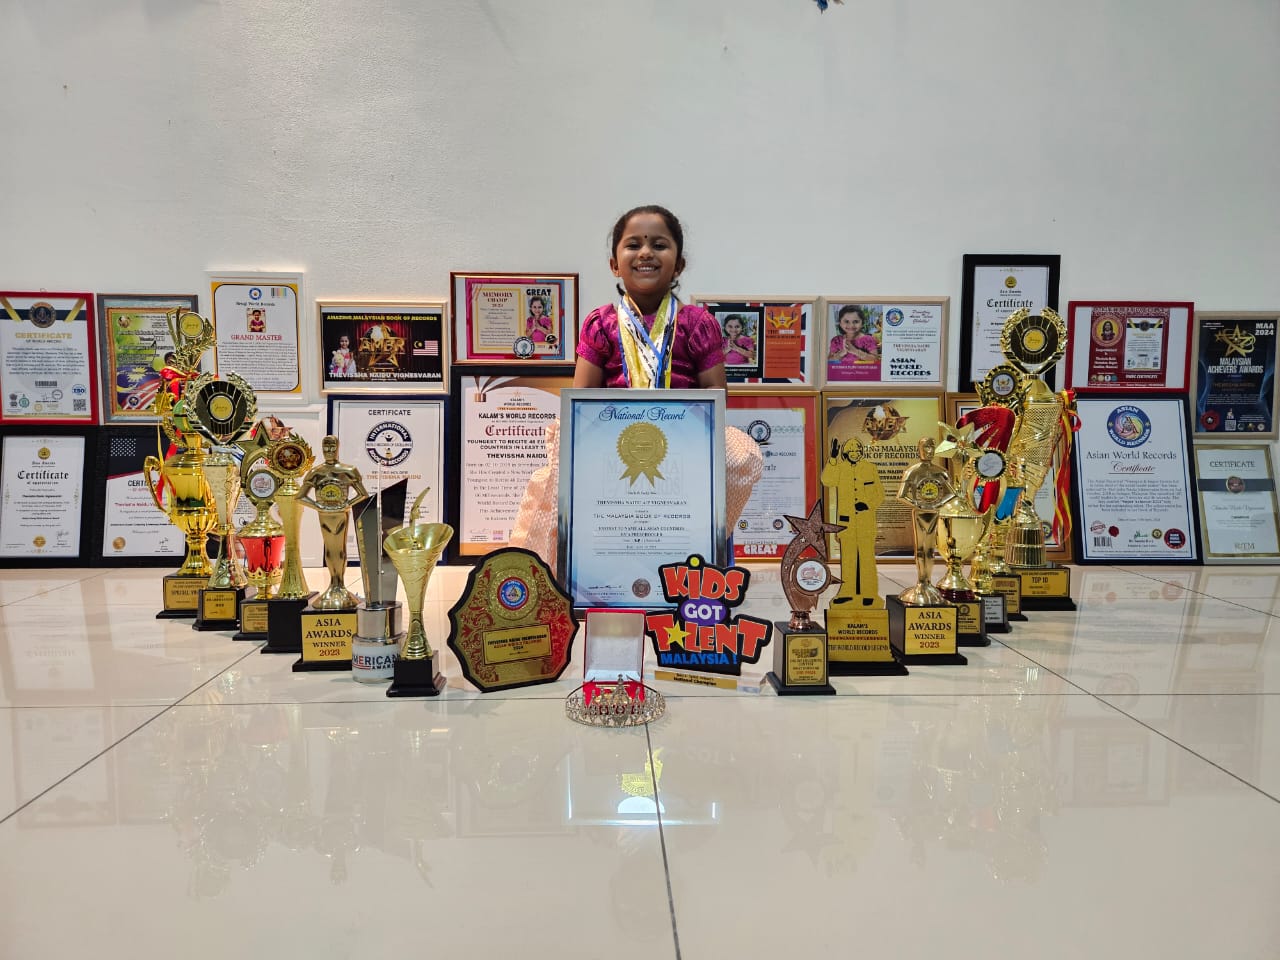 Thevissha sitting with all of her medals and record